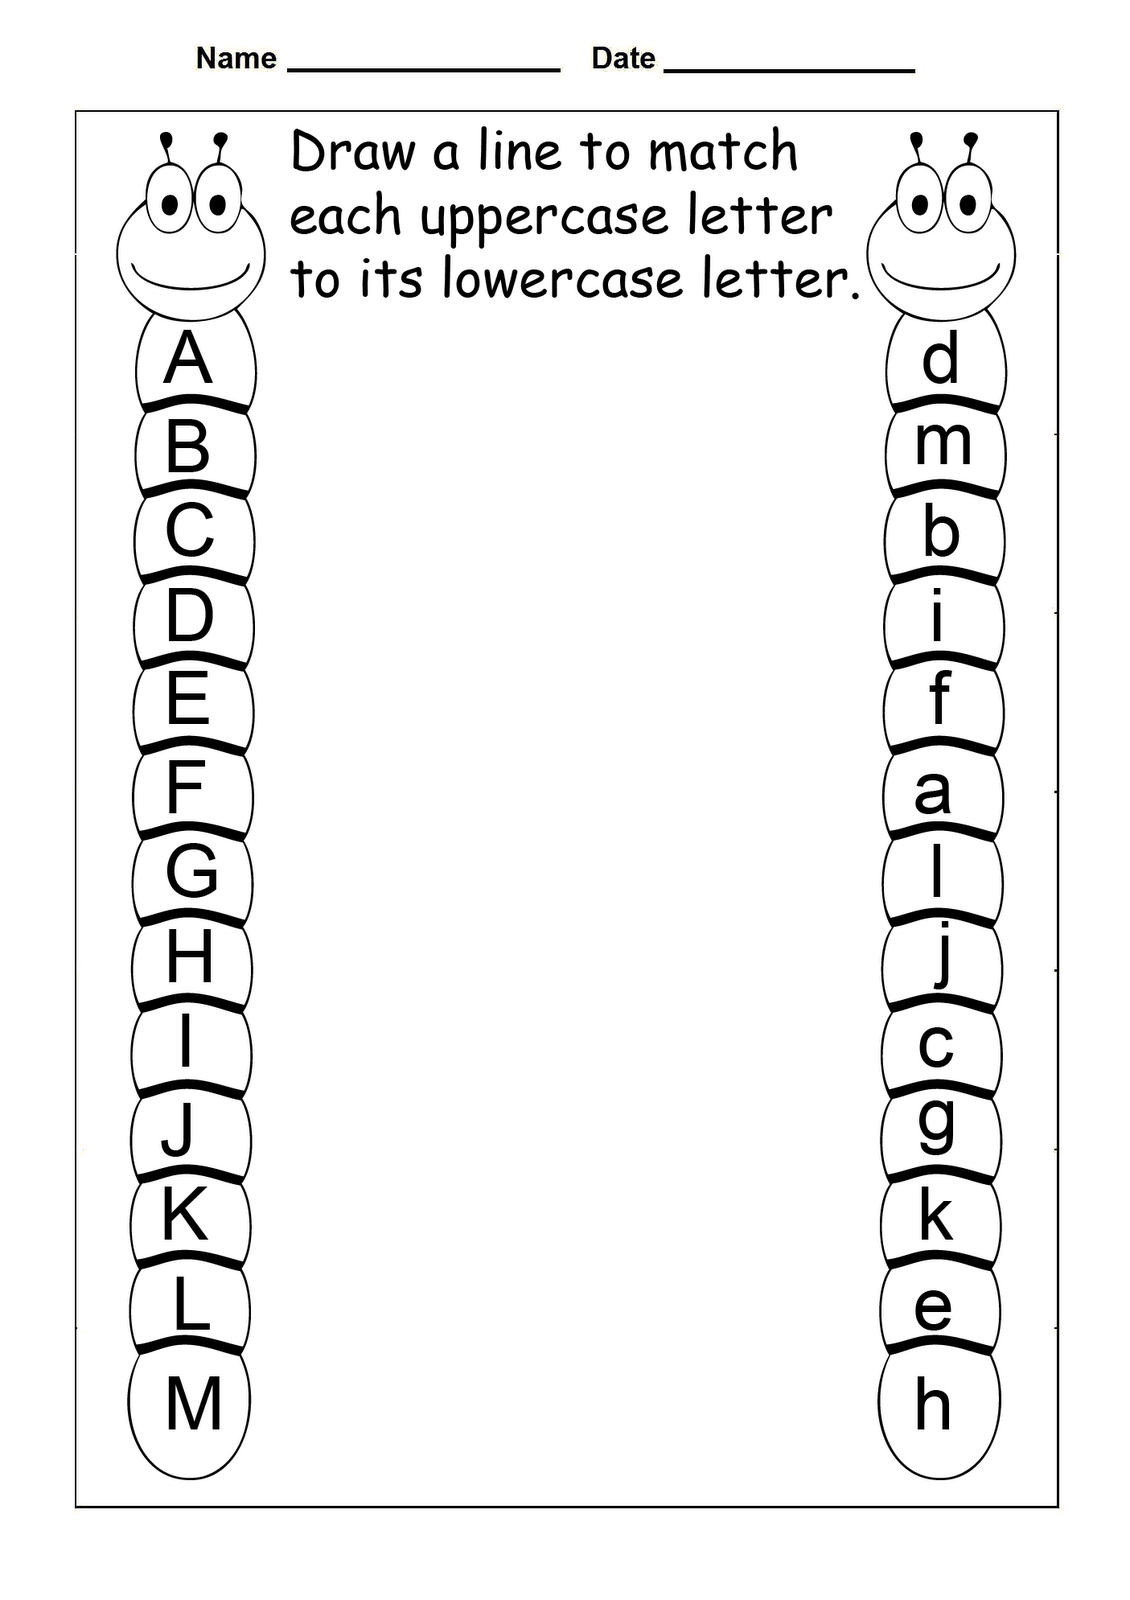 free-abc-worksheets-for-pre-k-activity-shelter